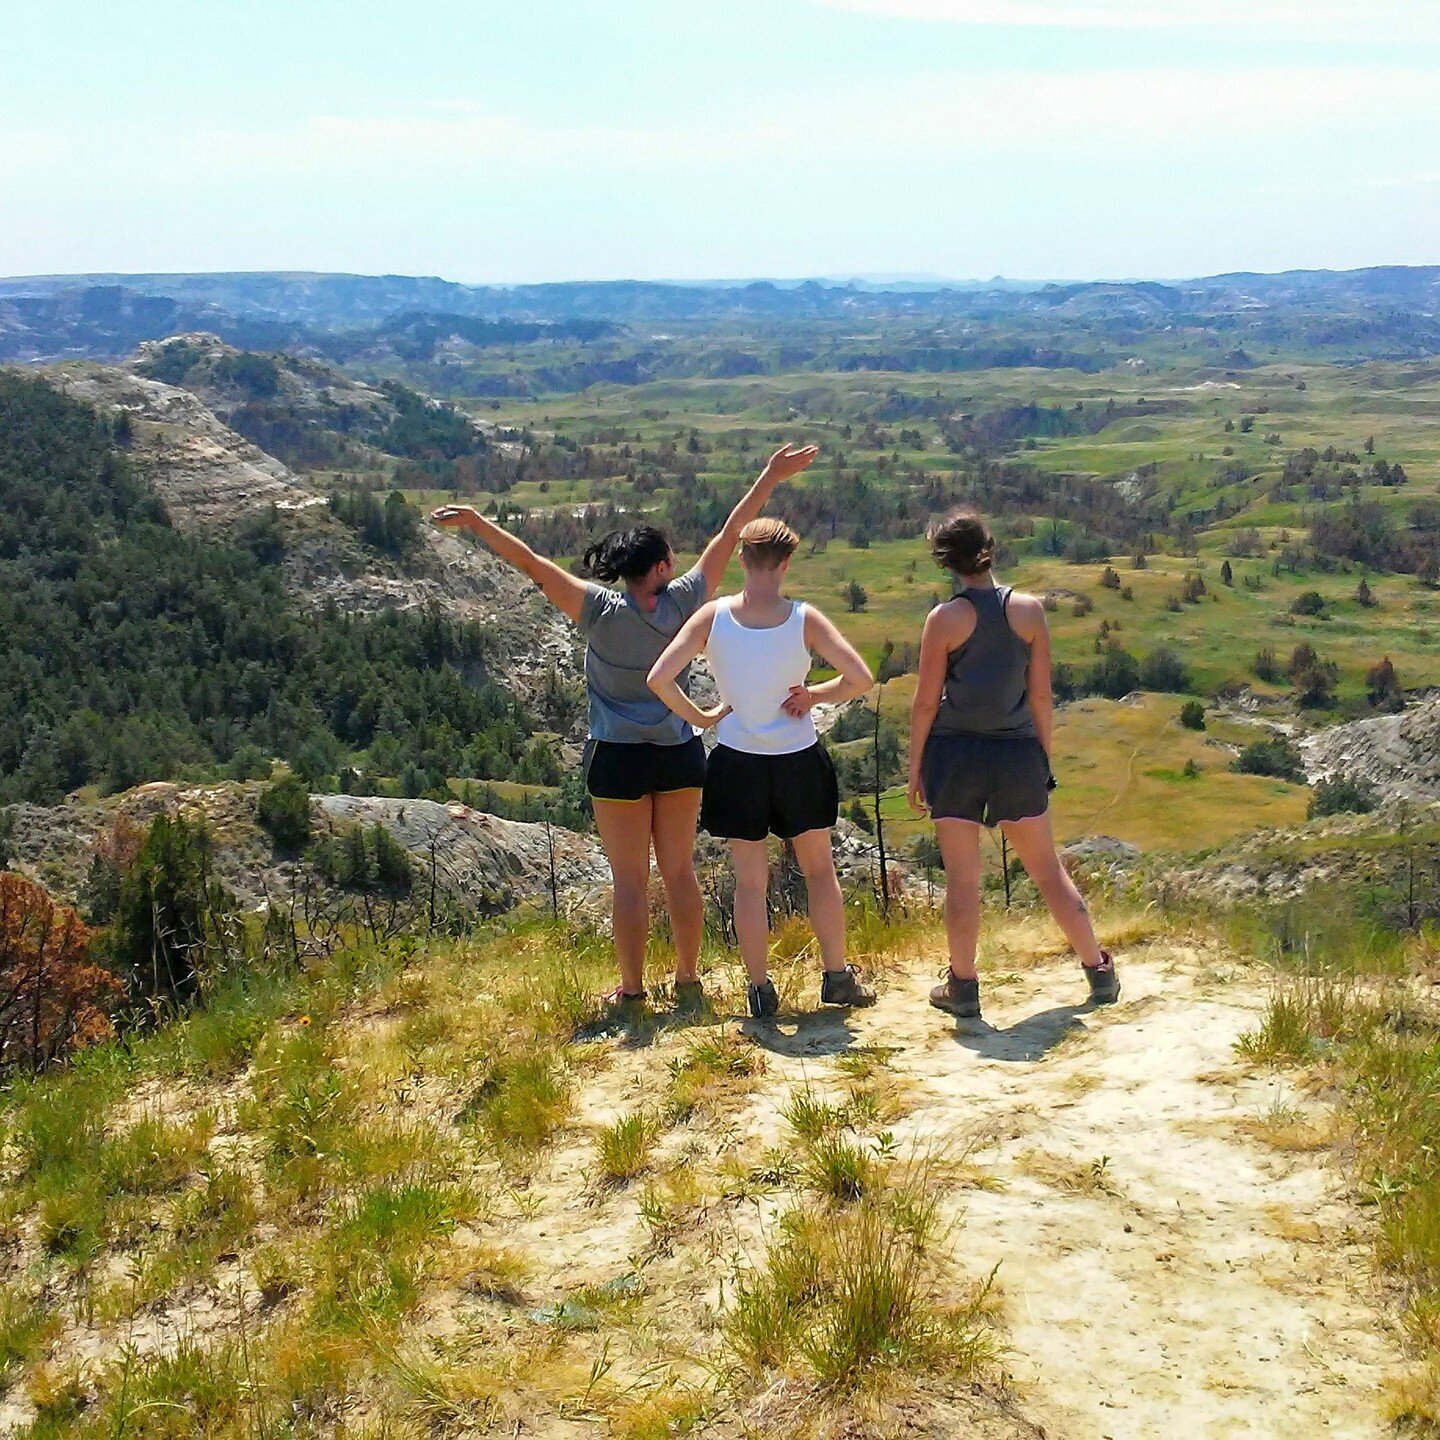 Happy trails to all of the Oakton Honors students participating in this summer's field study to Yellowstone!